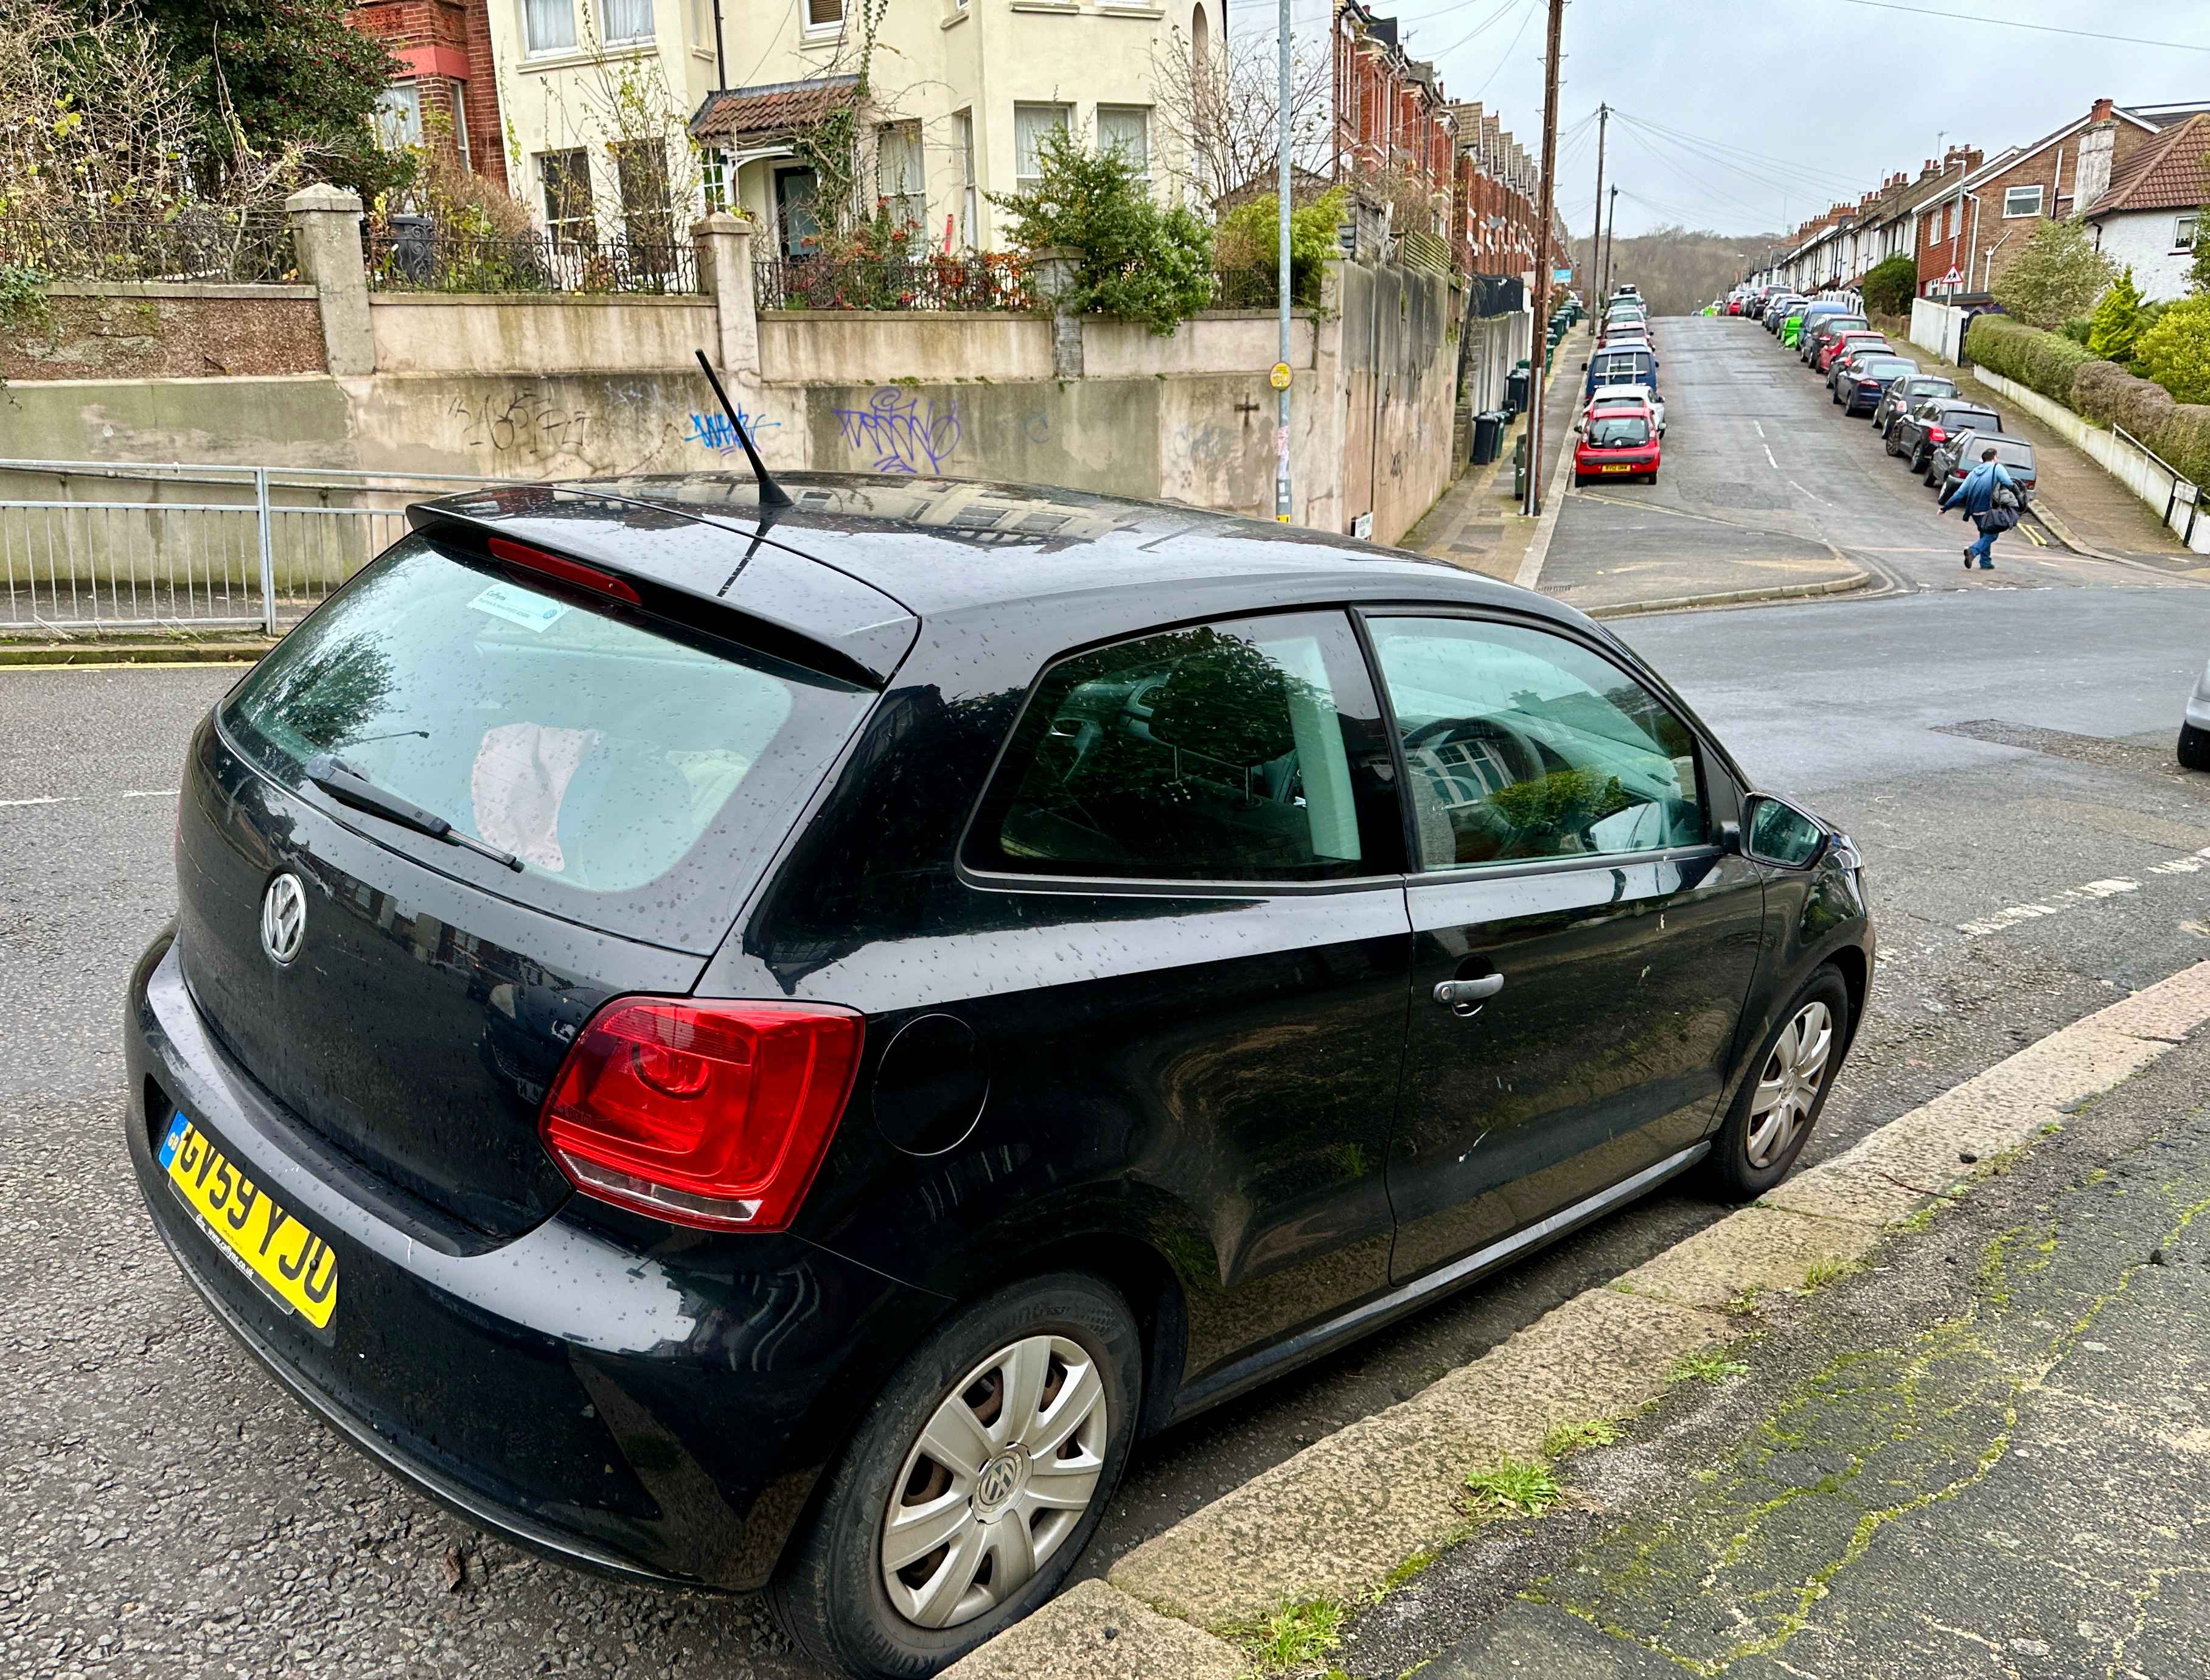 Photograph of GV59 YJU - a Black Volkswagen Polo parked in Hollingdean by a non-resident. The third of five photographs supplied by the residents of Hollingdean.